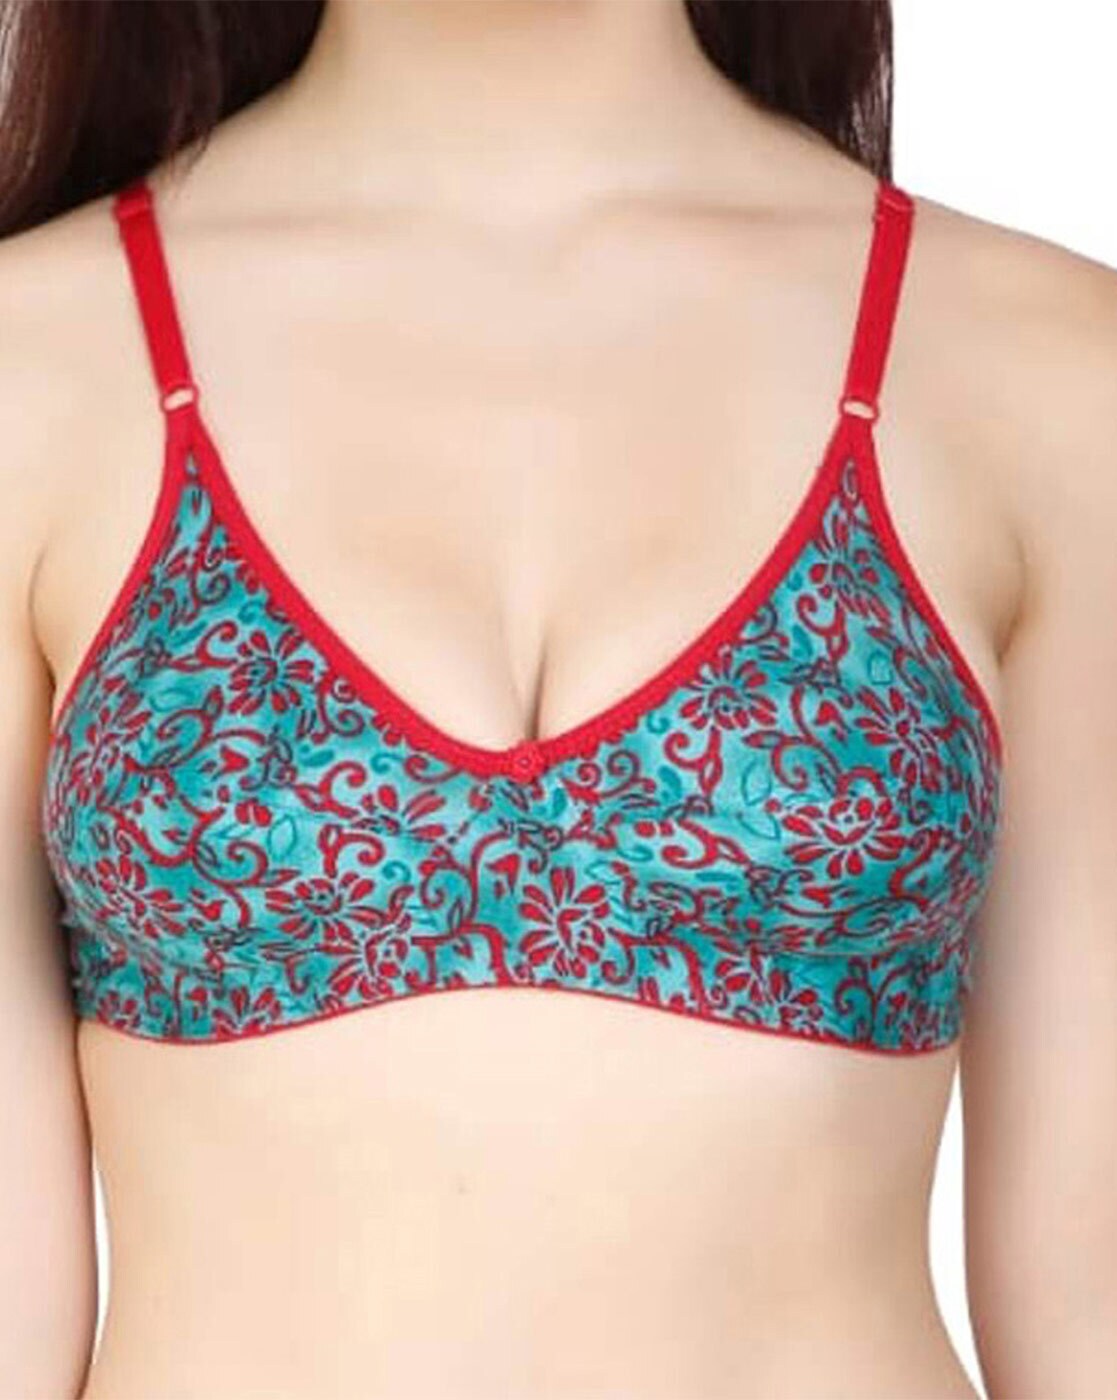 Buy Green Lingerie Sets for Women by CUP'S-IN Online